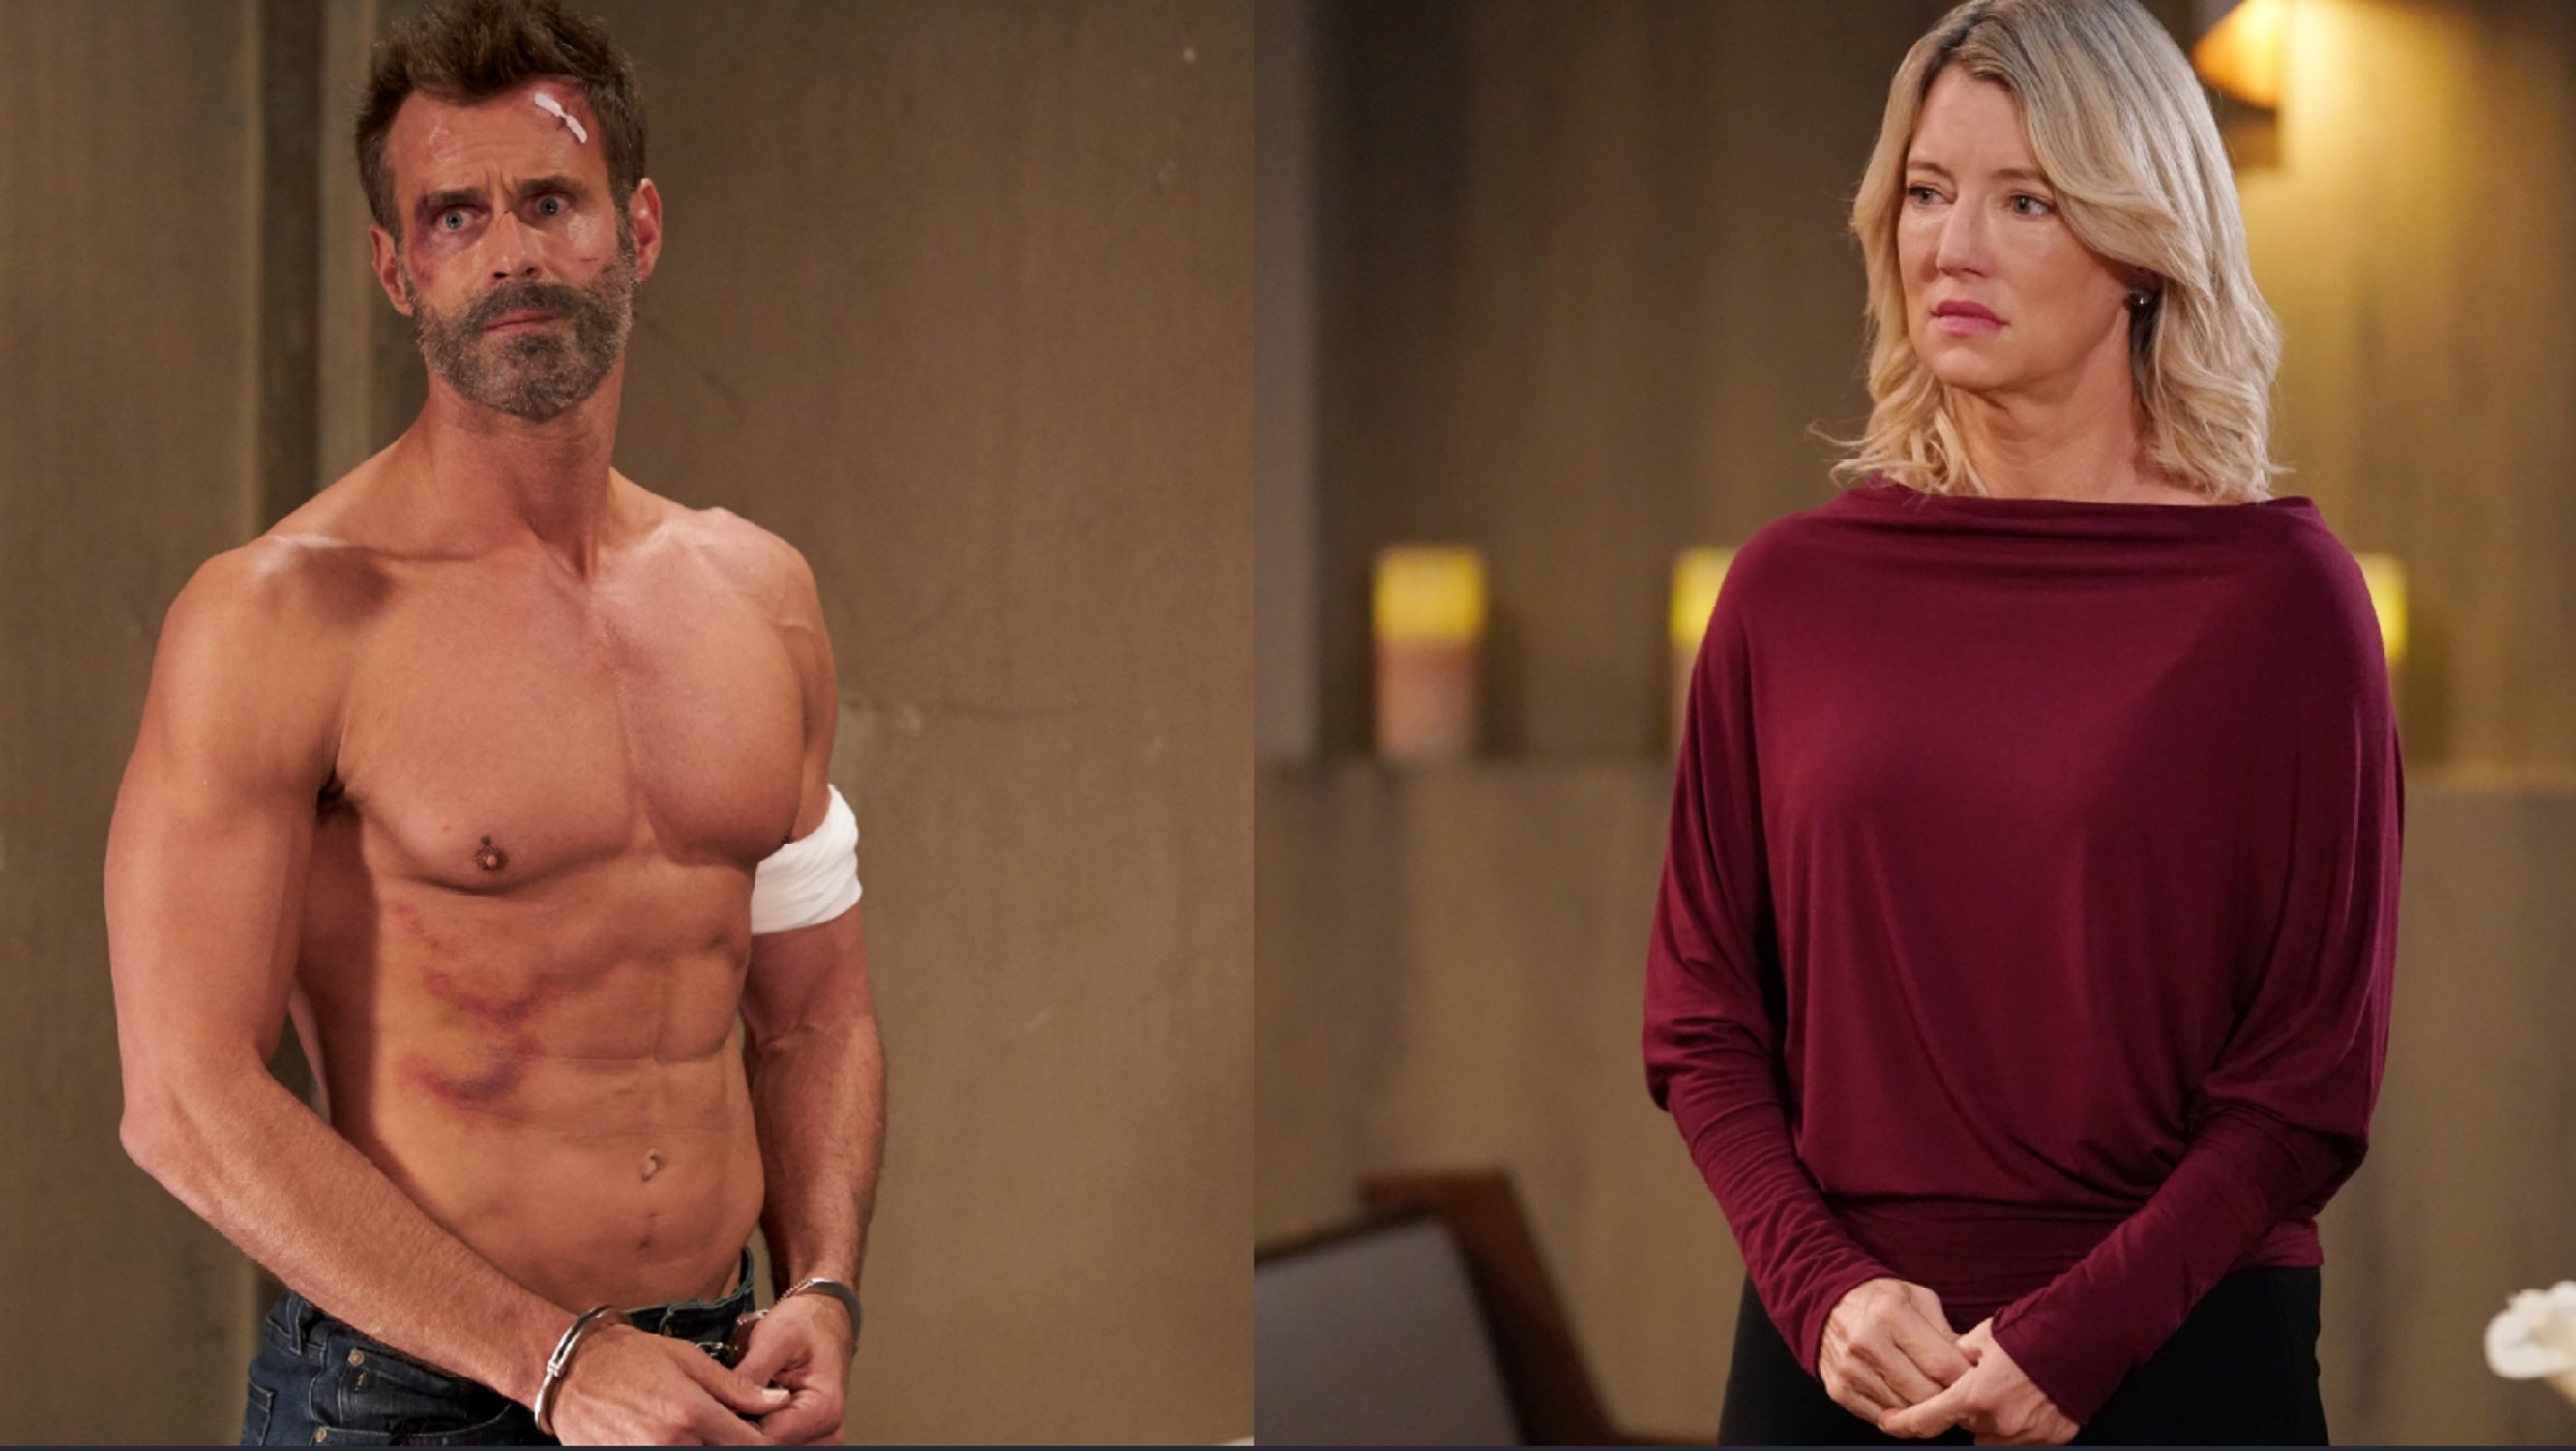 General Hospital stars Cameron Mathison, left, and Cynthia Watros, right